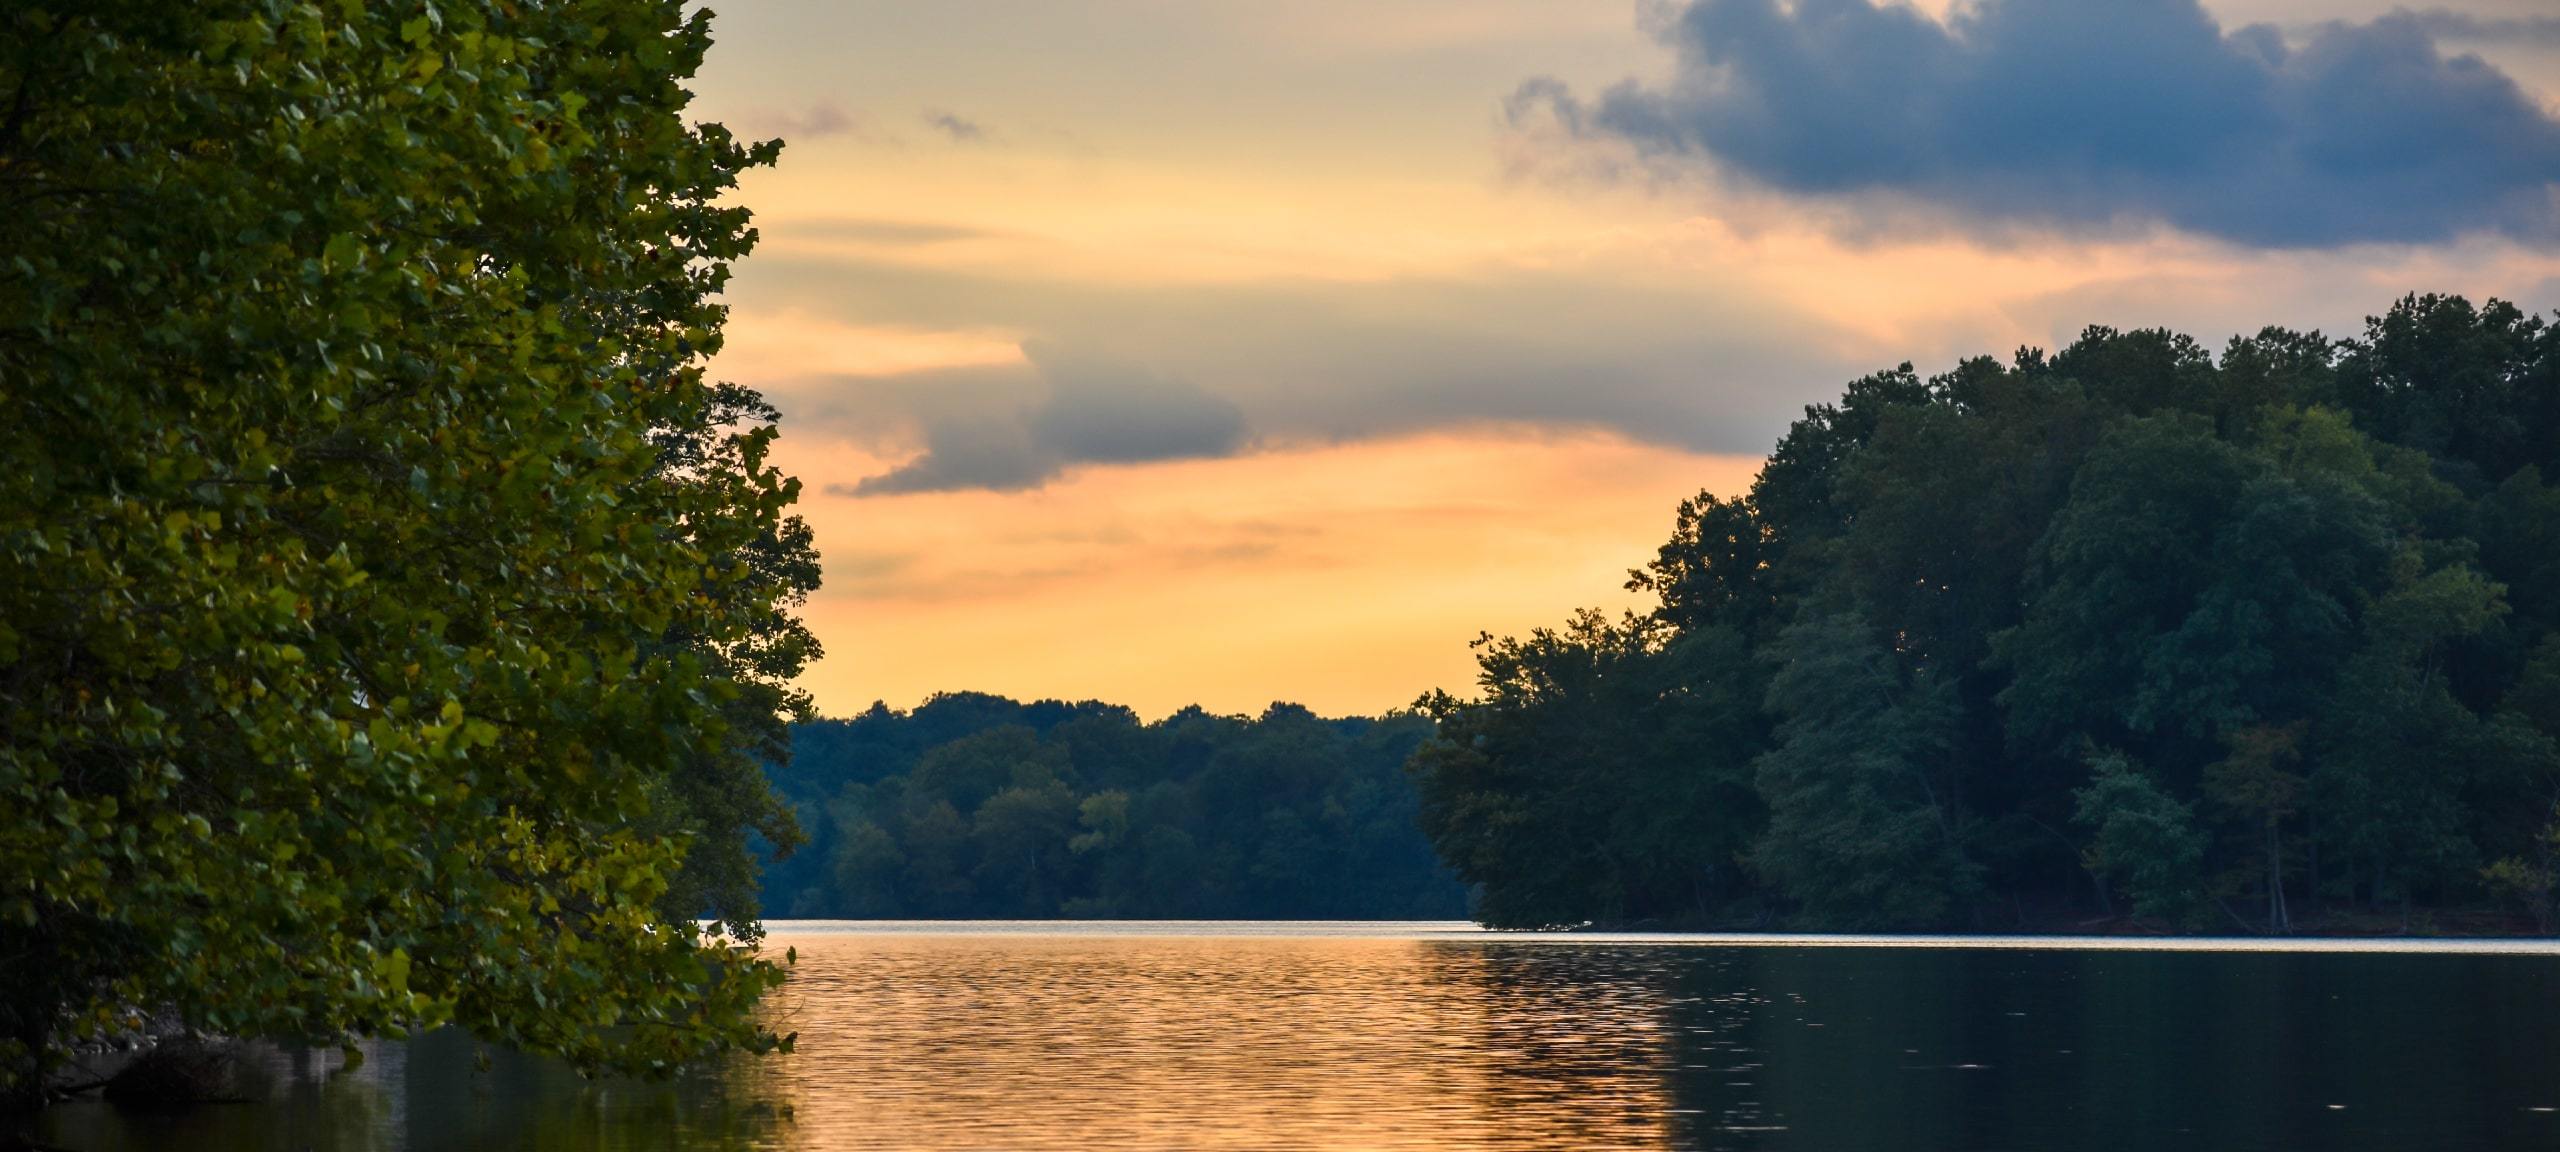 Sunset over Loch Raven Reservoir near Perry Hall, Maryland